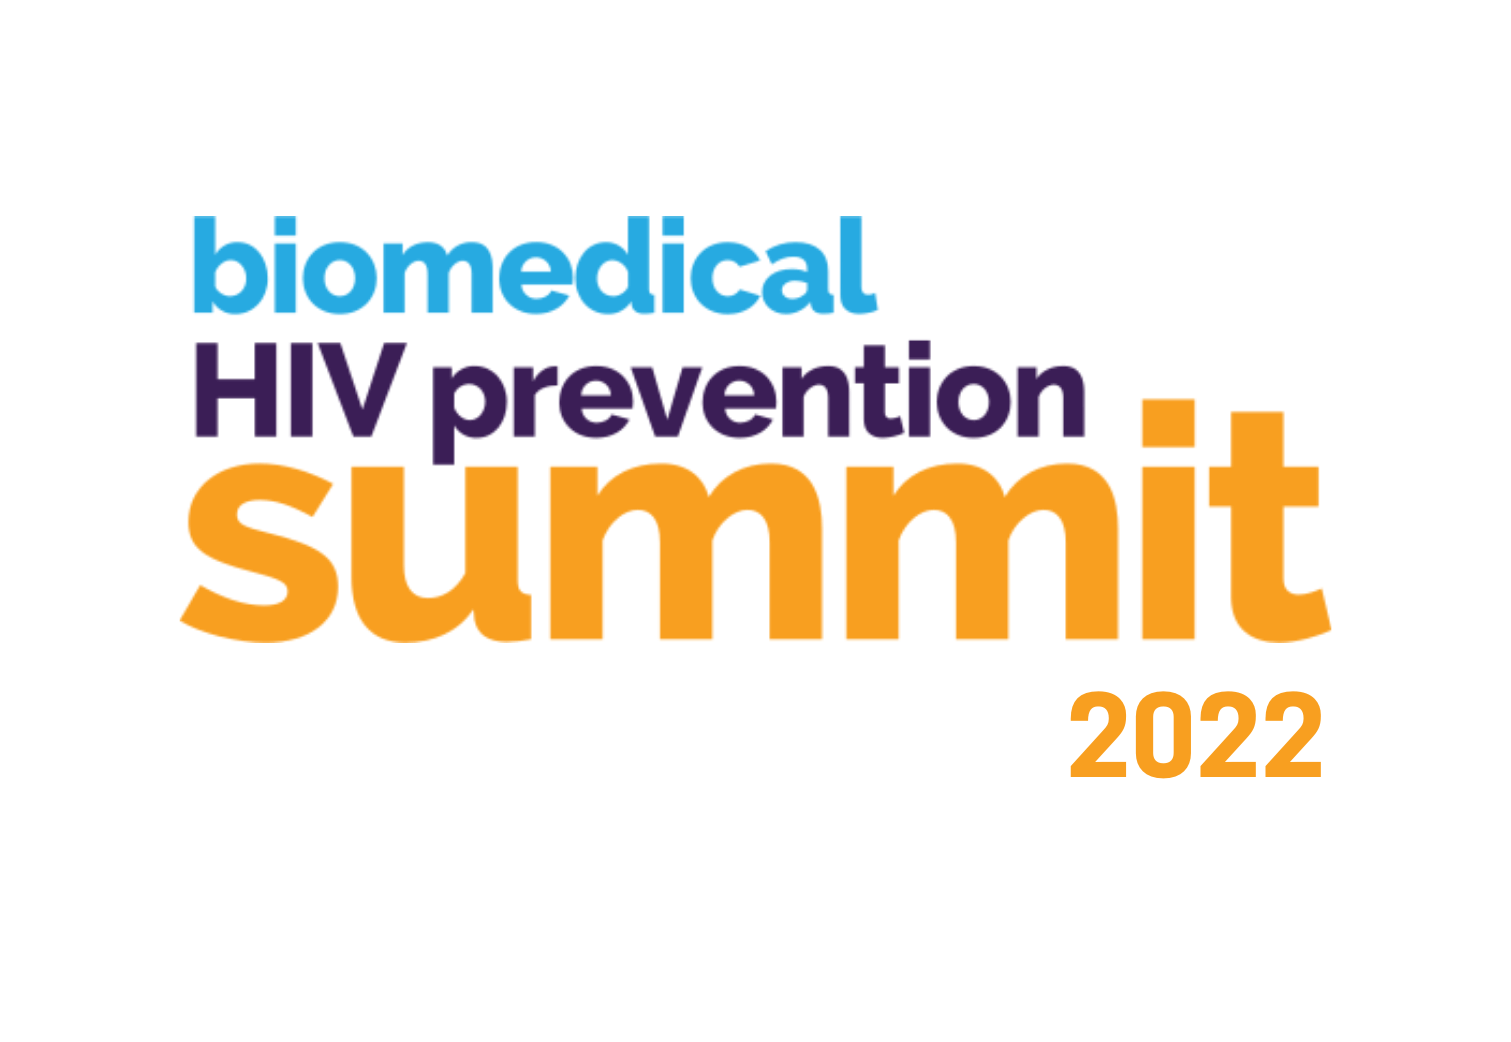 The Biomedical HIV Prevention Summit 2022